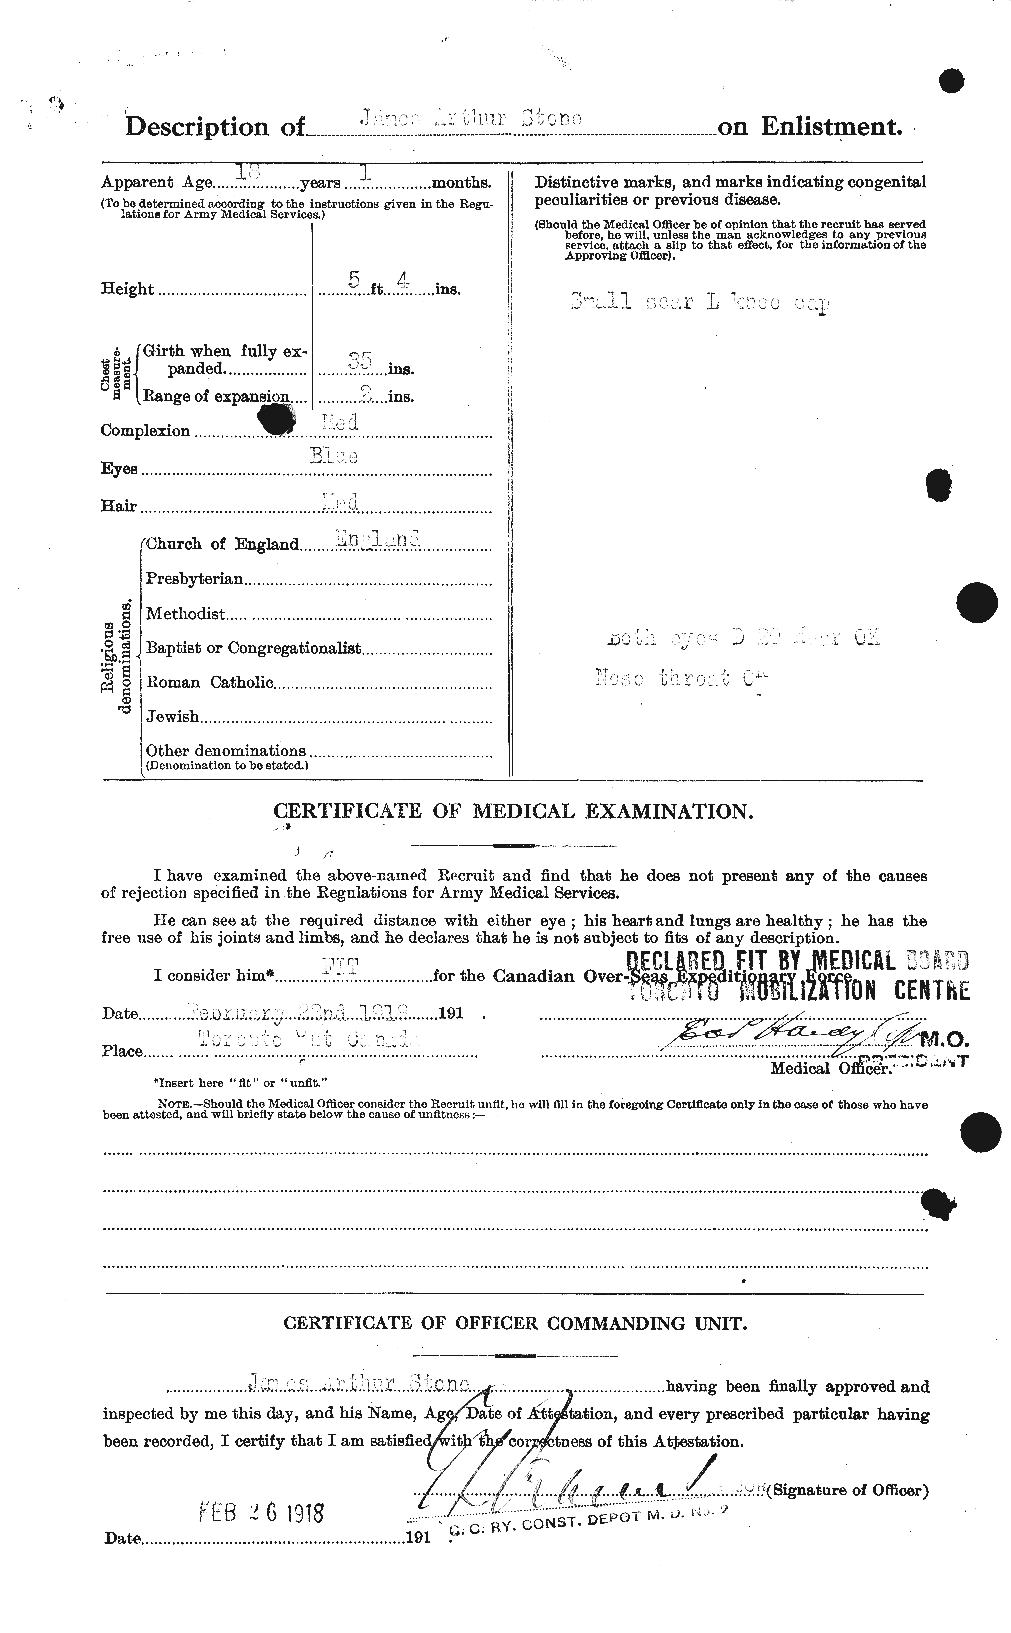 Personnel Records of the First World War - CEF 121960b